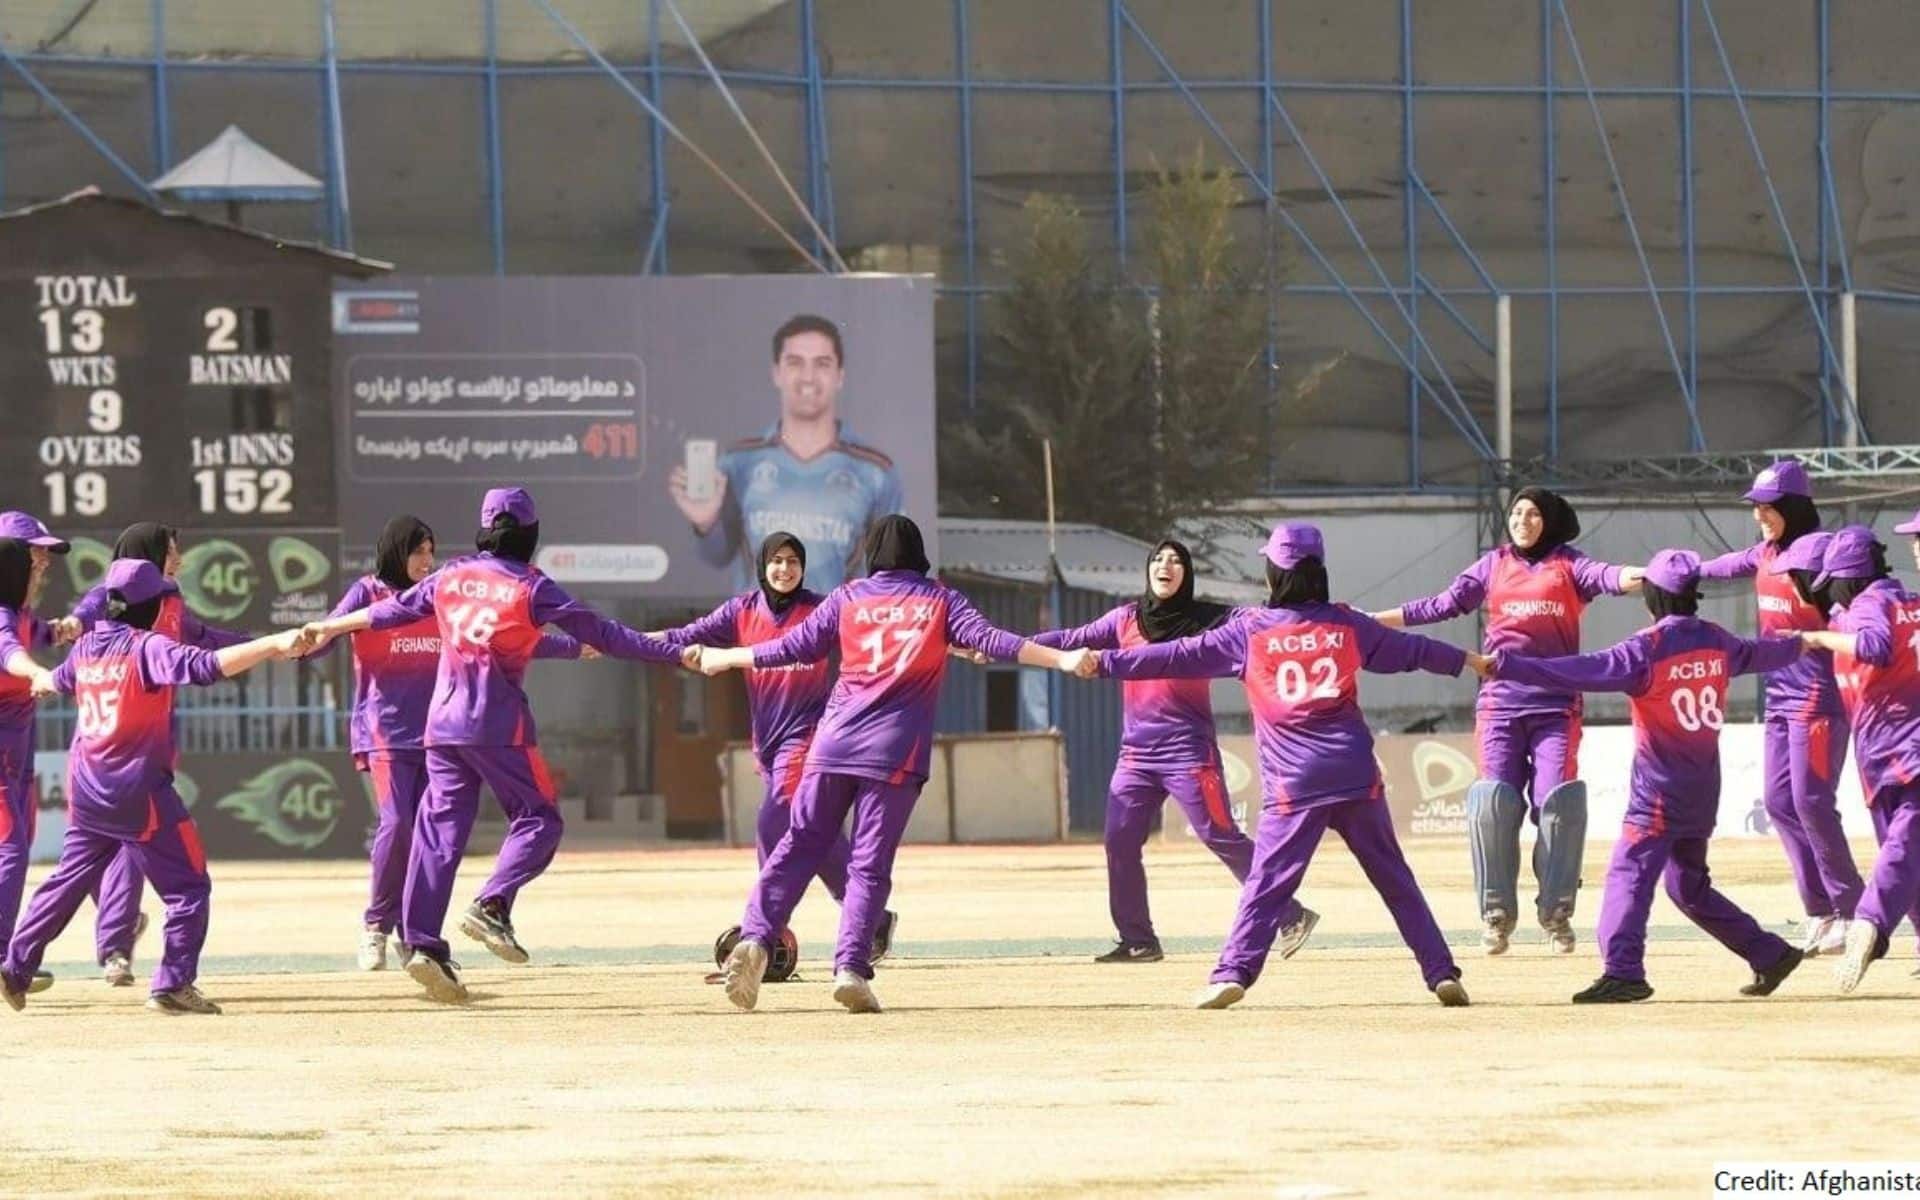 Afghanistan women cricketers during training (X.com)